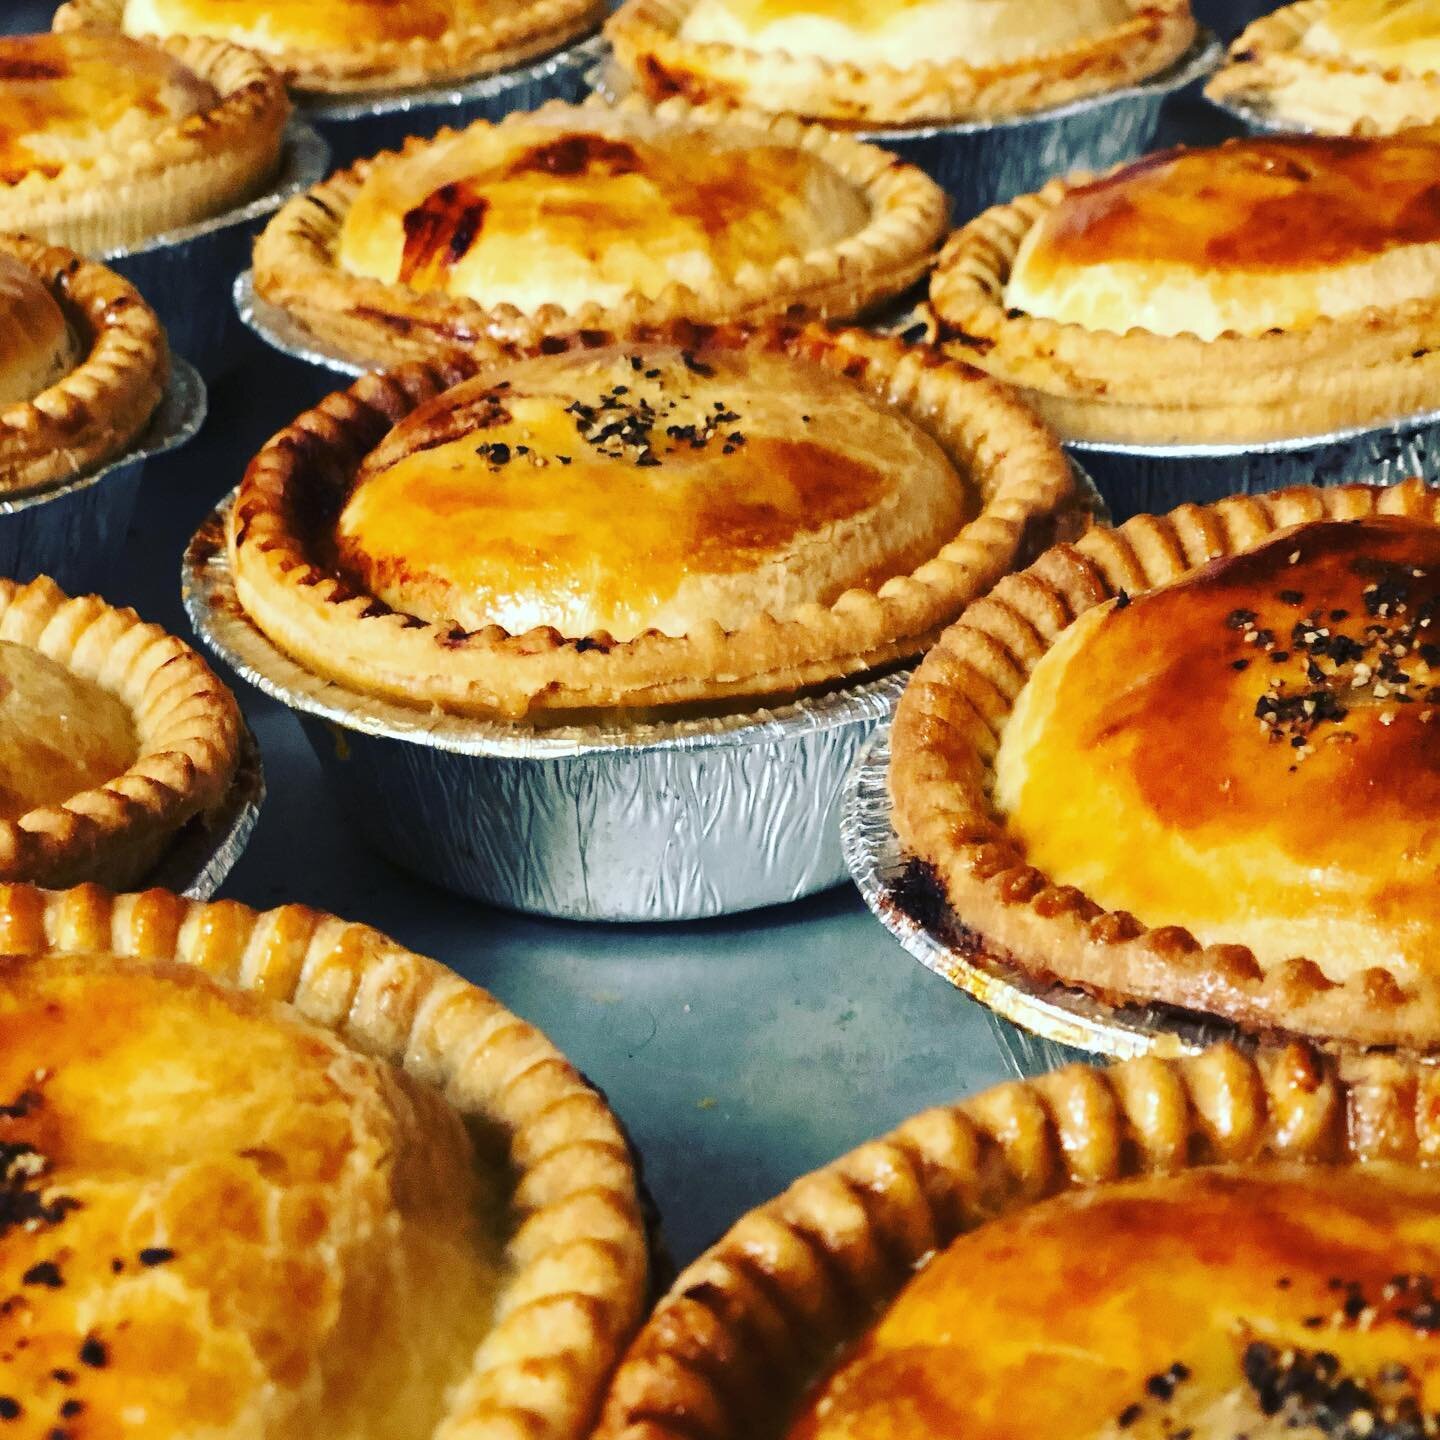 These bad boys are almost ready! Slow cooked beef brisket in a creamy peppercorn sauce 😍😍😍 Stay tuned for more of our flavours! #piepiepie #pies #properpie #shortcrustpastry #pie #peppercornsauce #cotswoldpieco #cotswolds #cotswoldfood #cotswoldfo